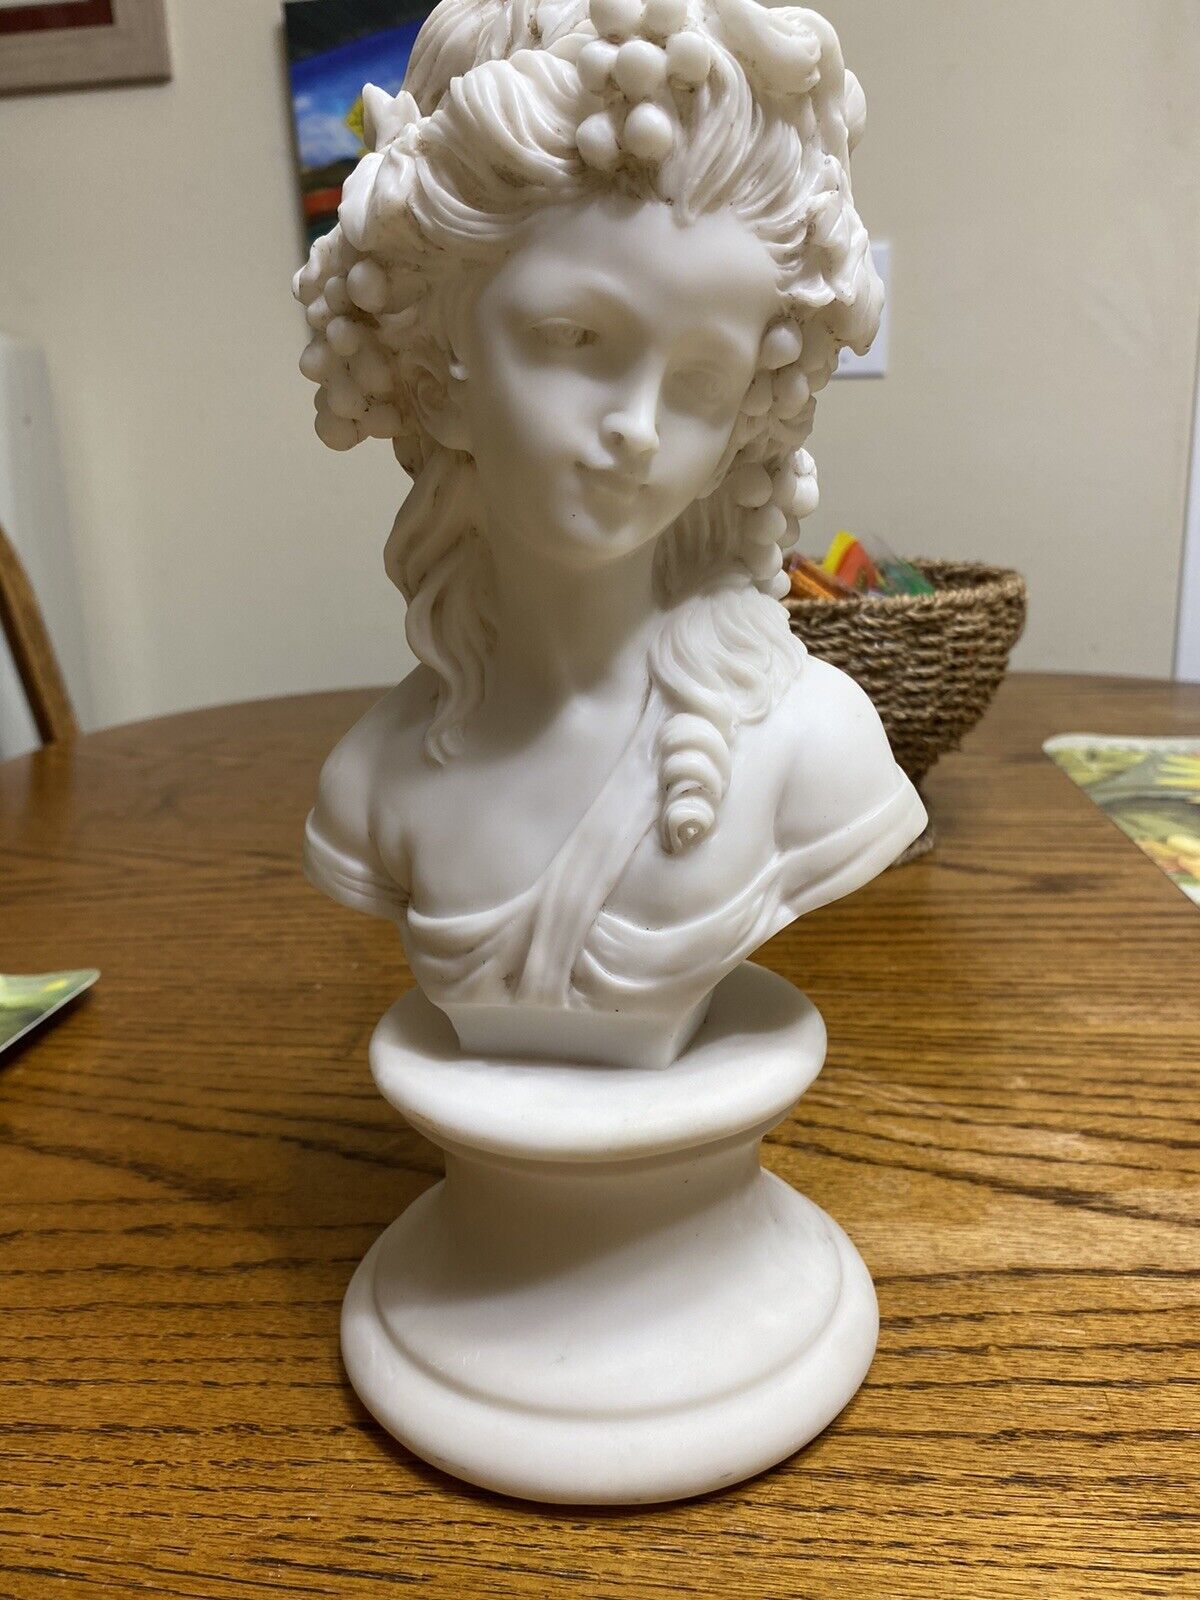 A 12” Tall Resin Bust Of A Lady 